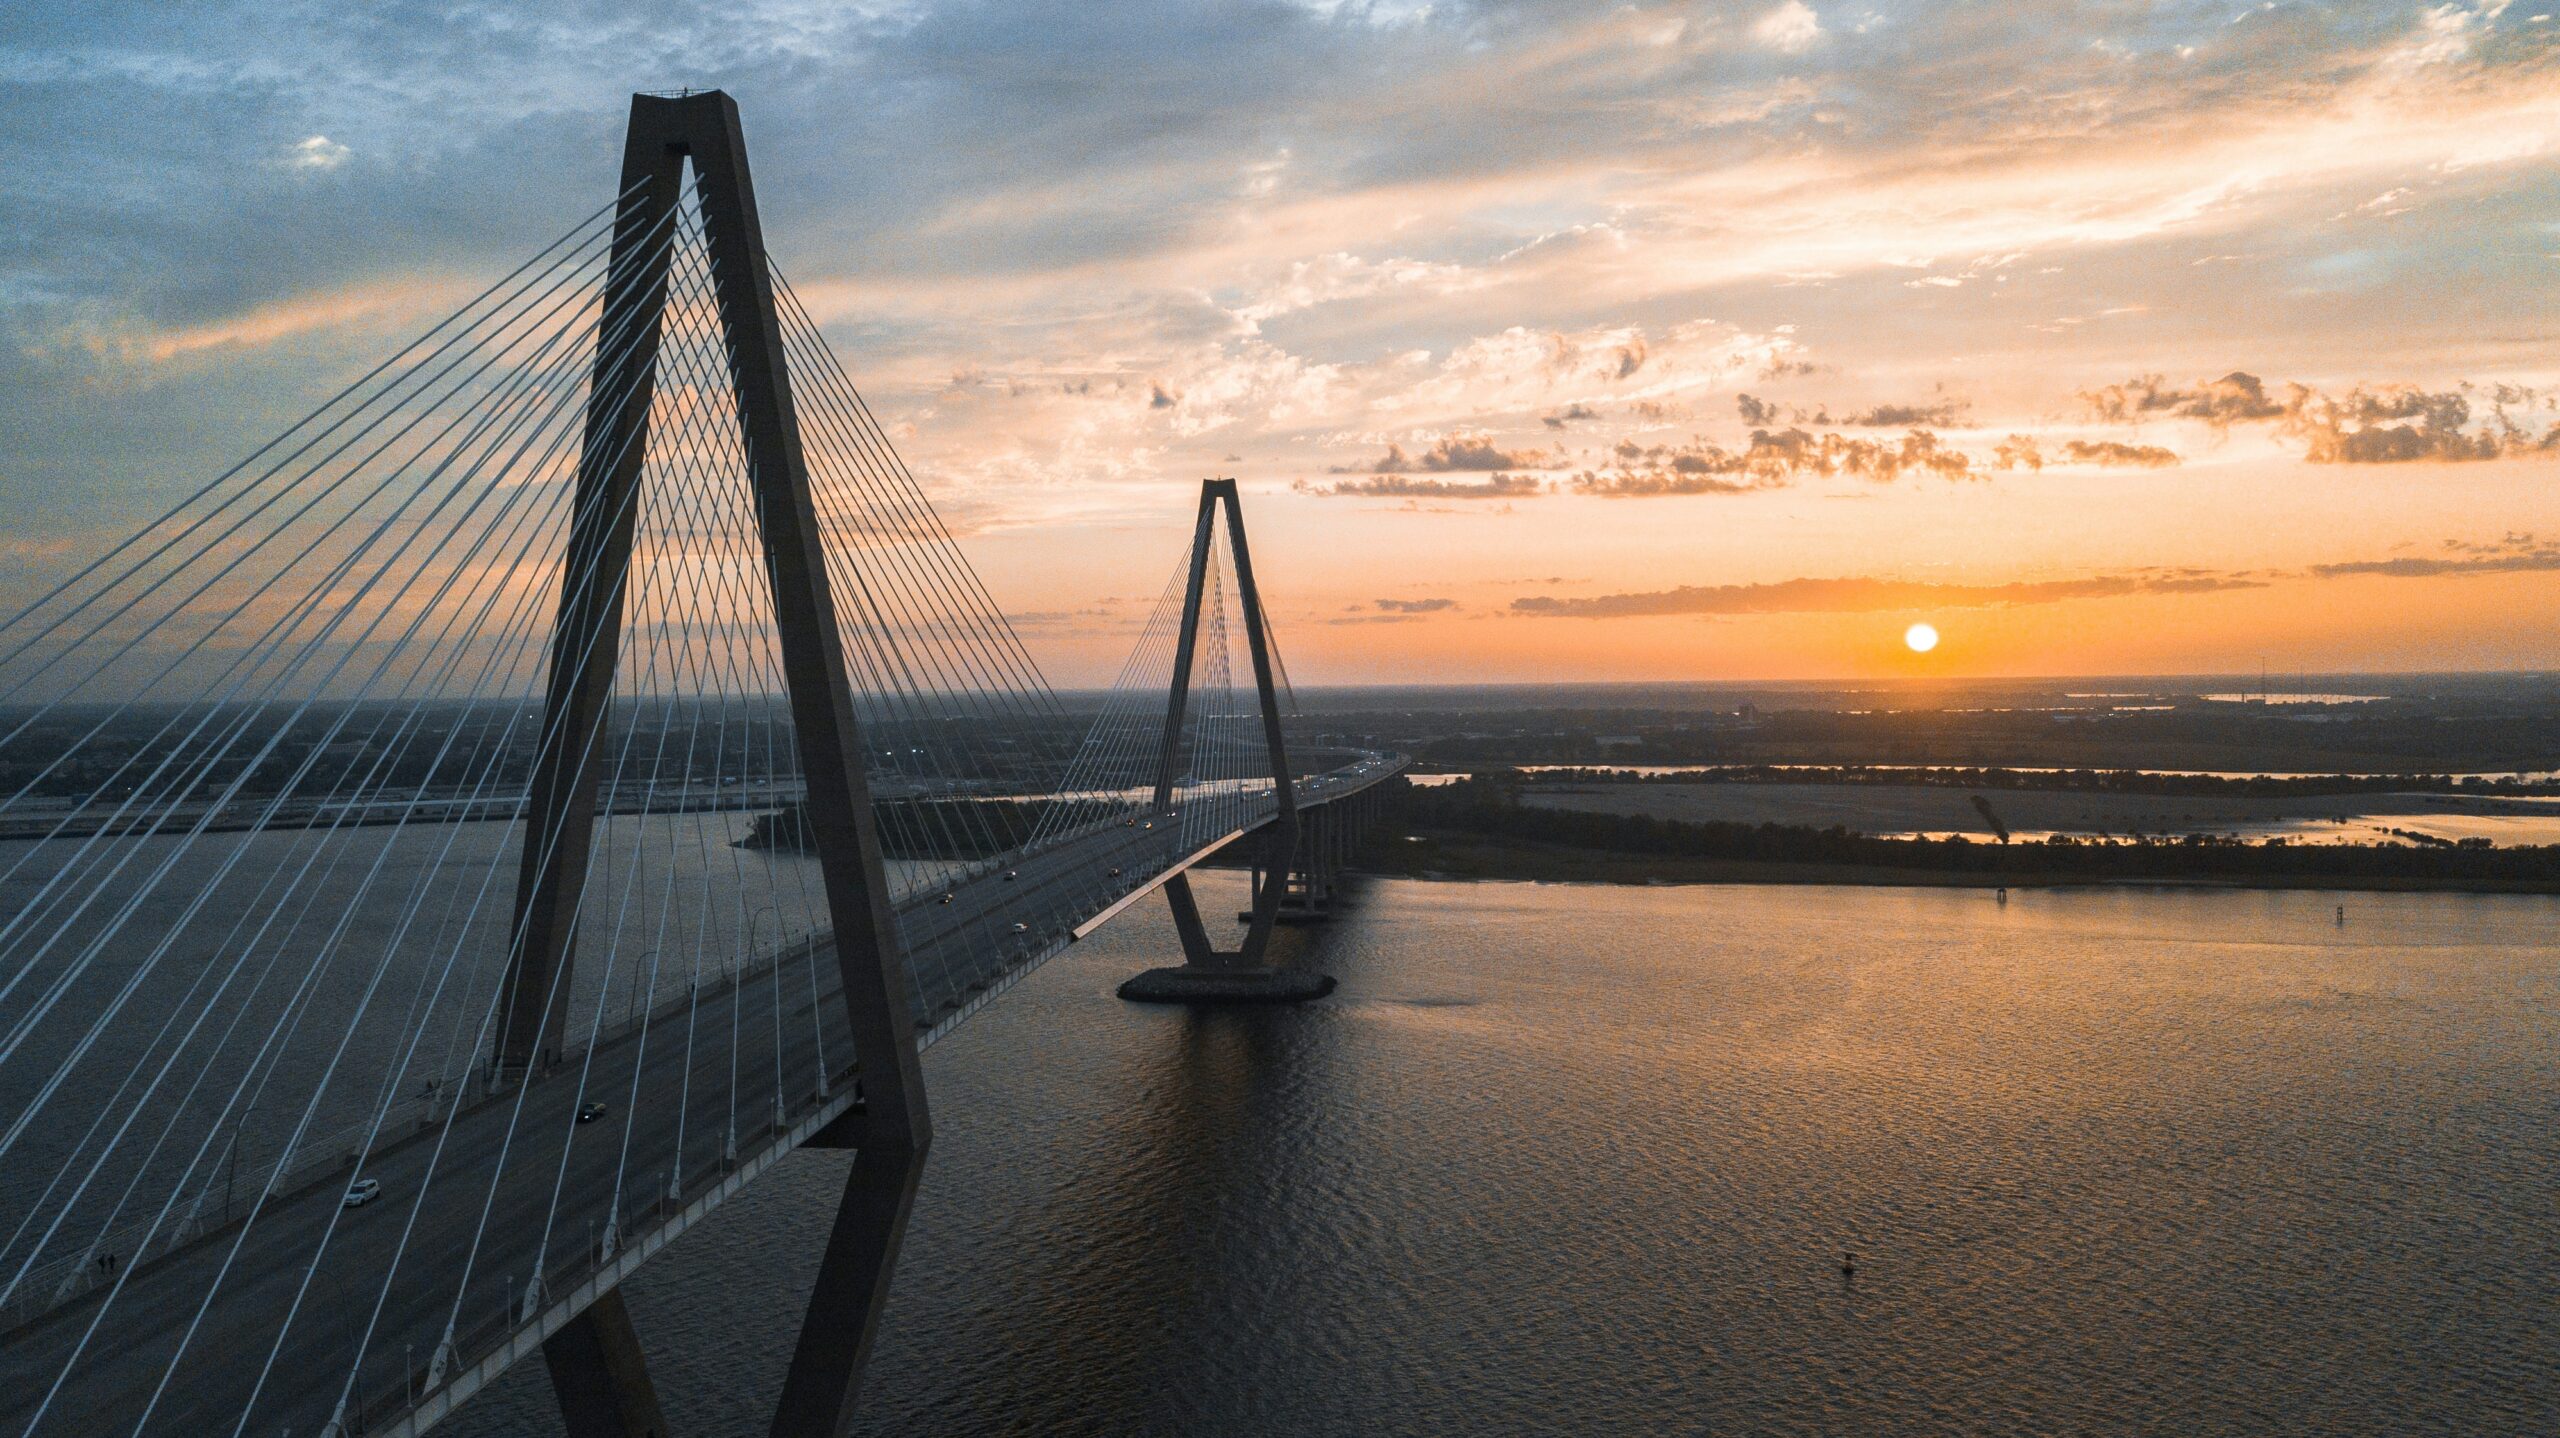 Charleston is one of the best places to live in South Carolina for beach fun, shopping and fine dining. Pictured: An aerial view of a bridge in Charleston